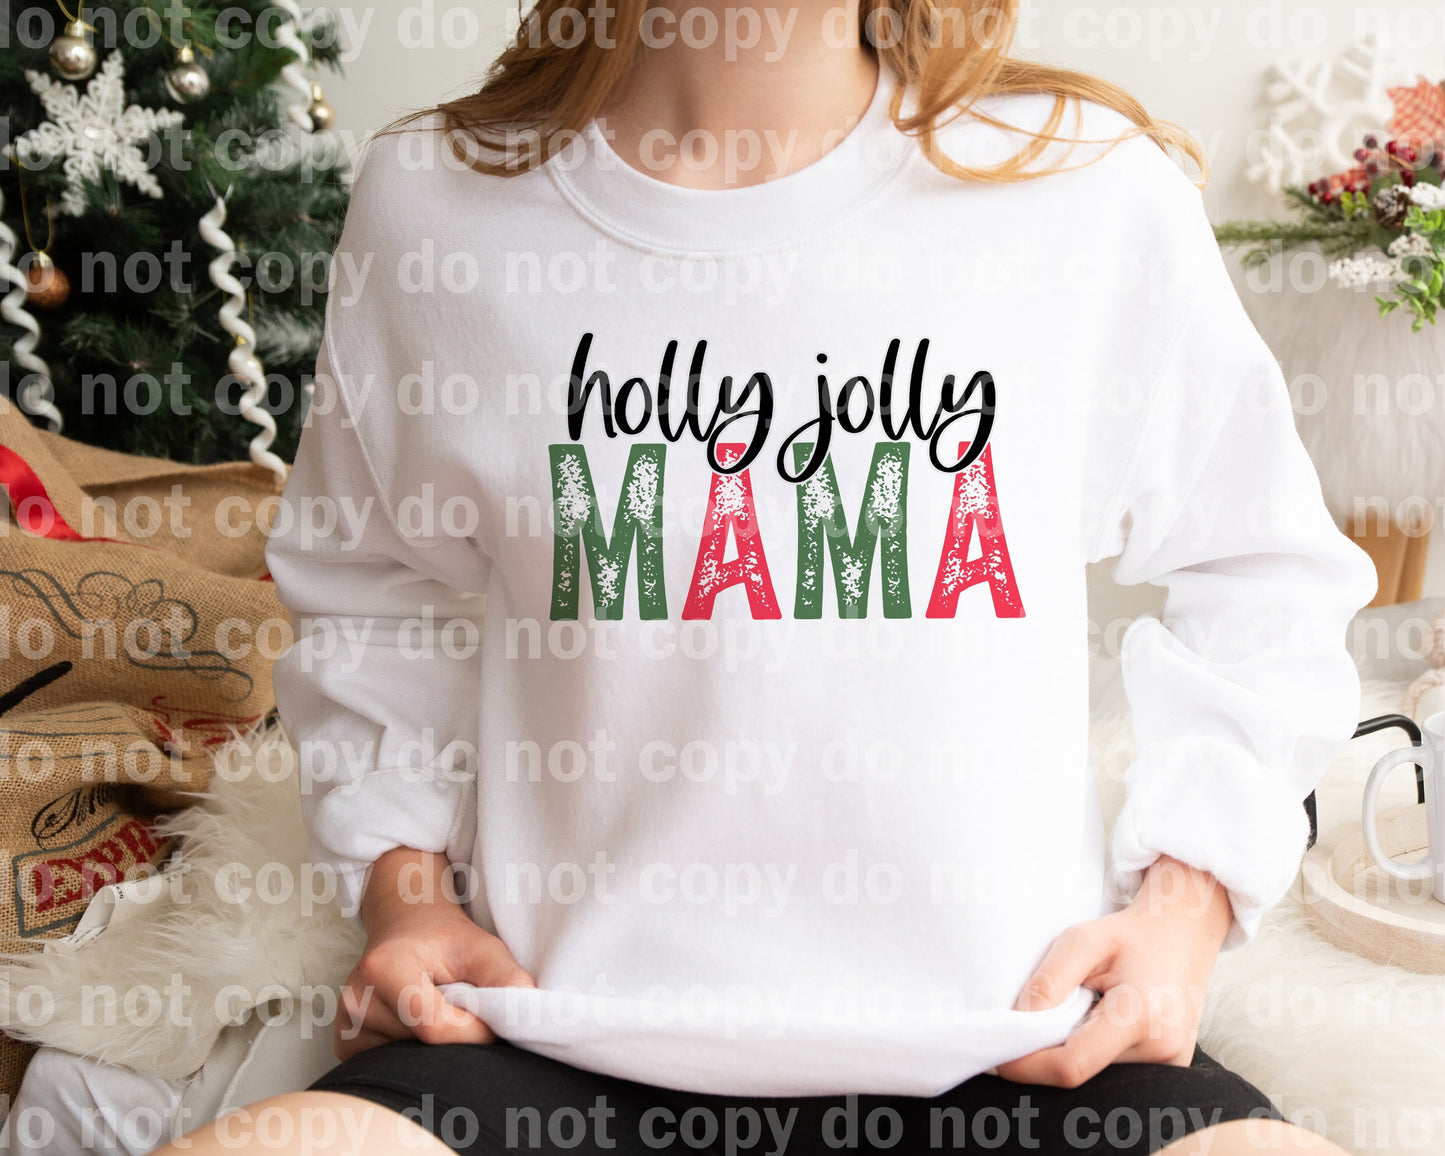 Holy Jolly Mama Typography Distressed Dream Print or Sublimation Print